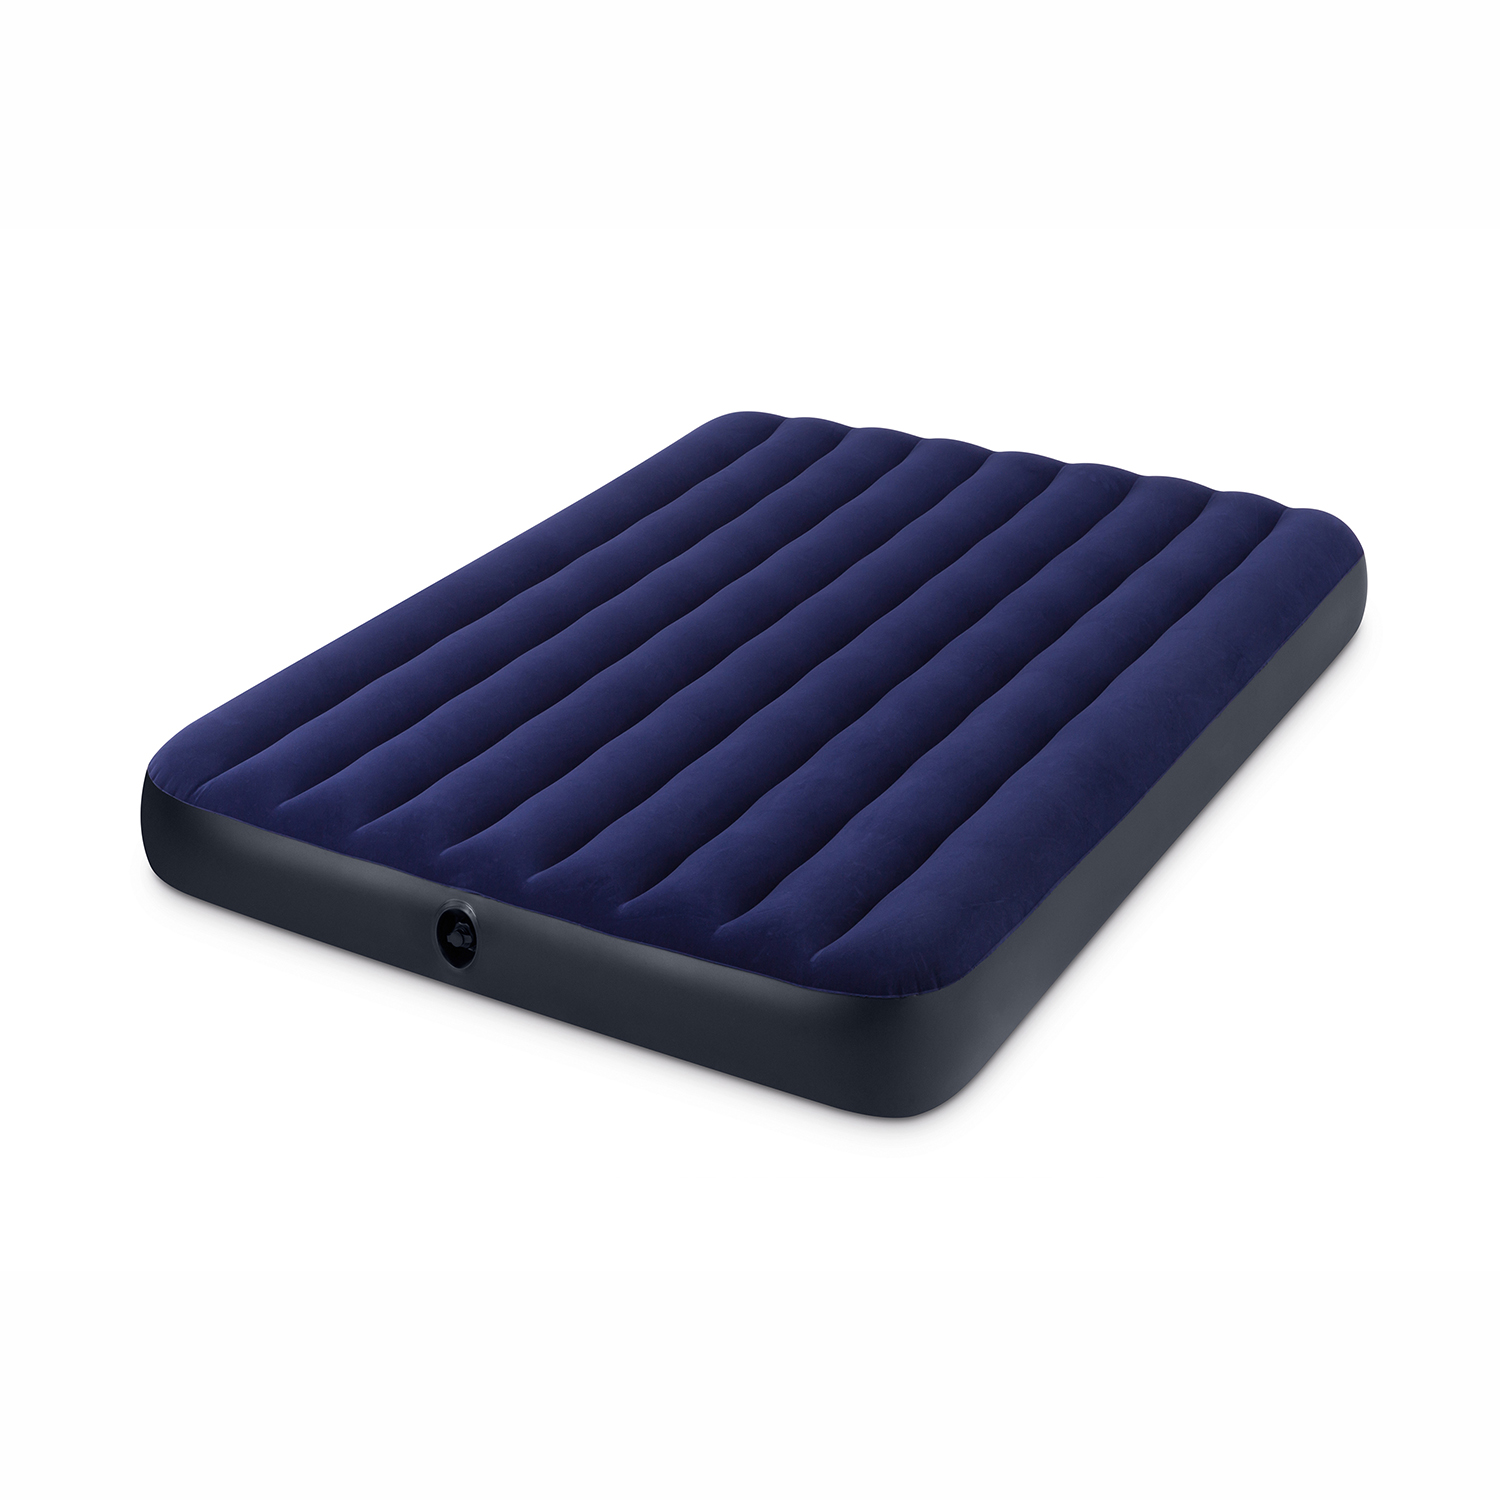 Intex 8.75" Classic Downy Inflatable Airbed Mattress, Queen - image 1 of 6